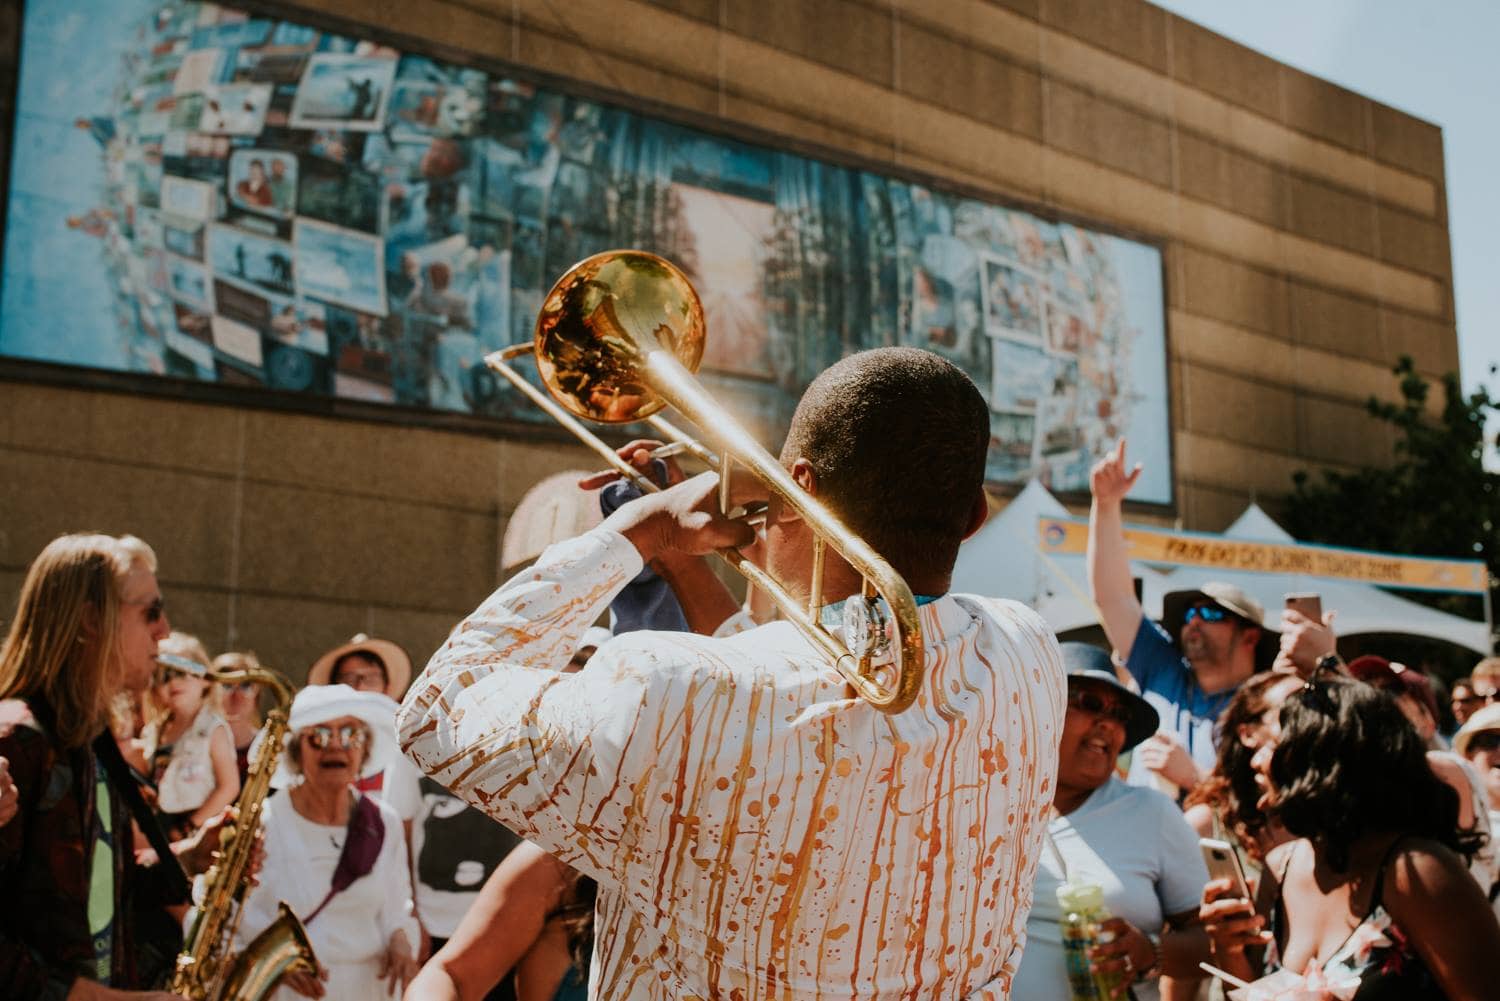 A man playing a trumpet in front of a mural